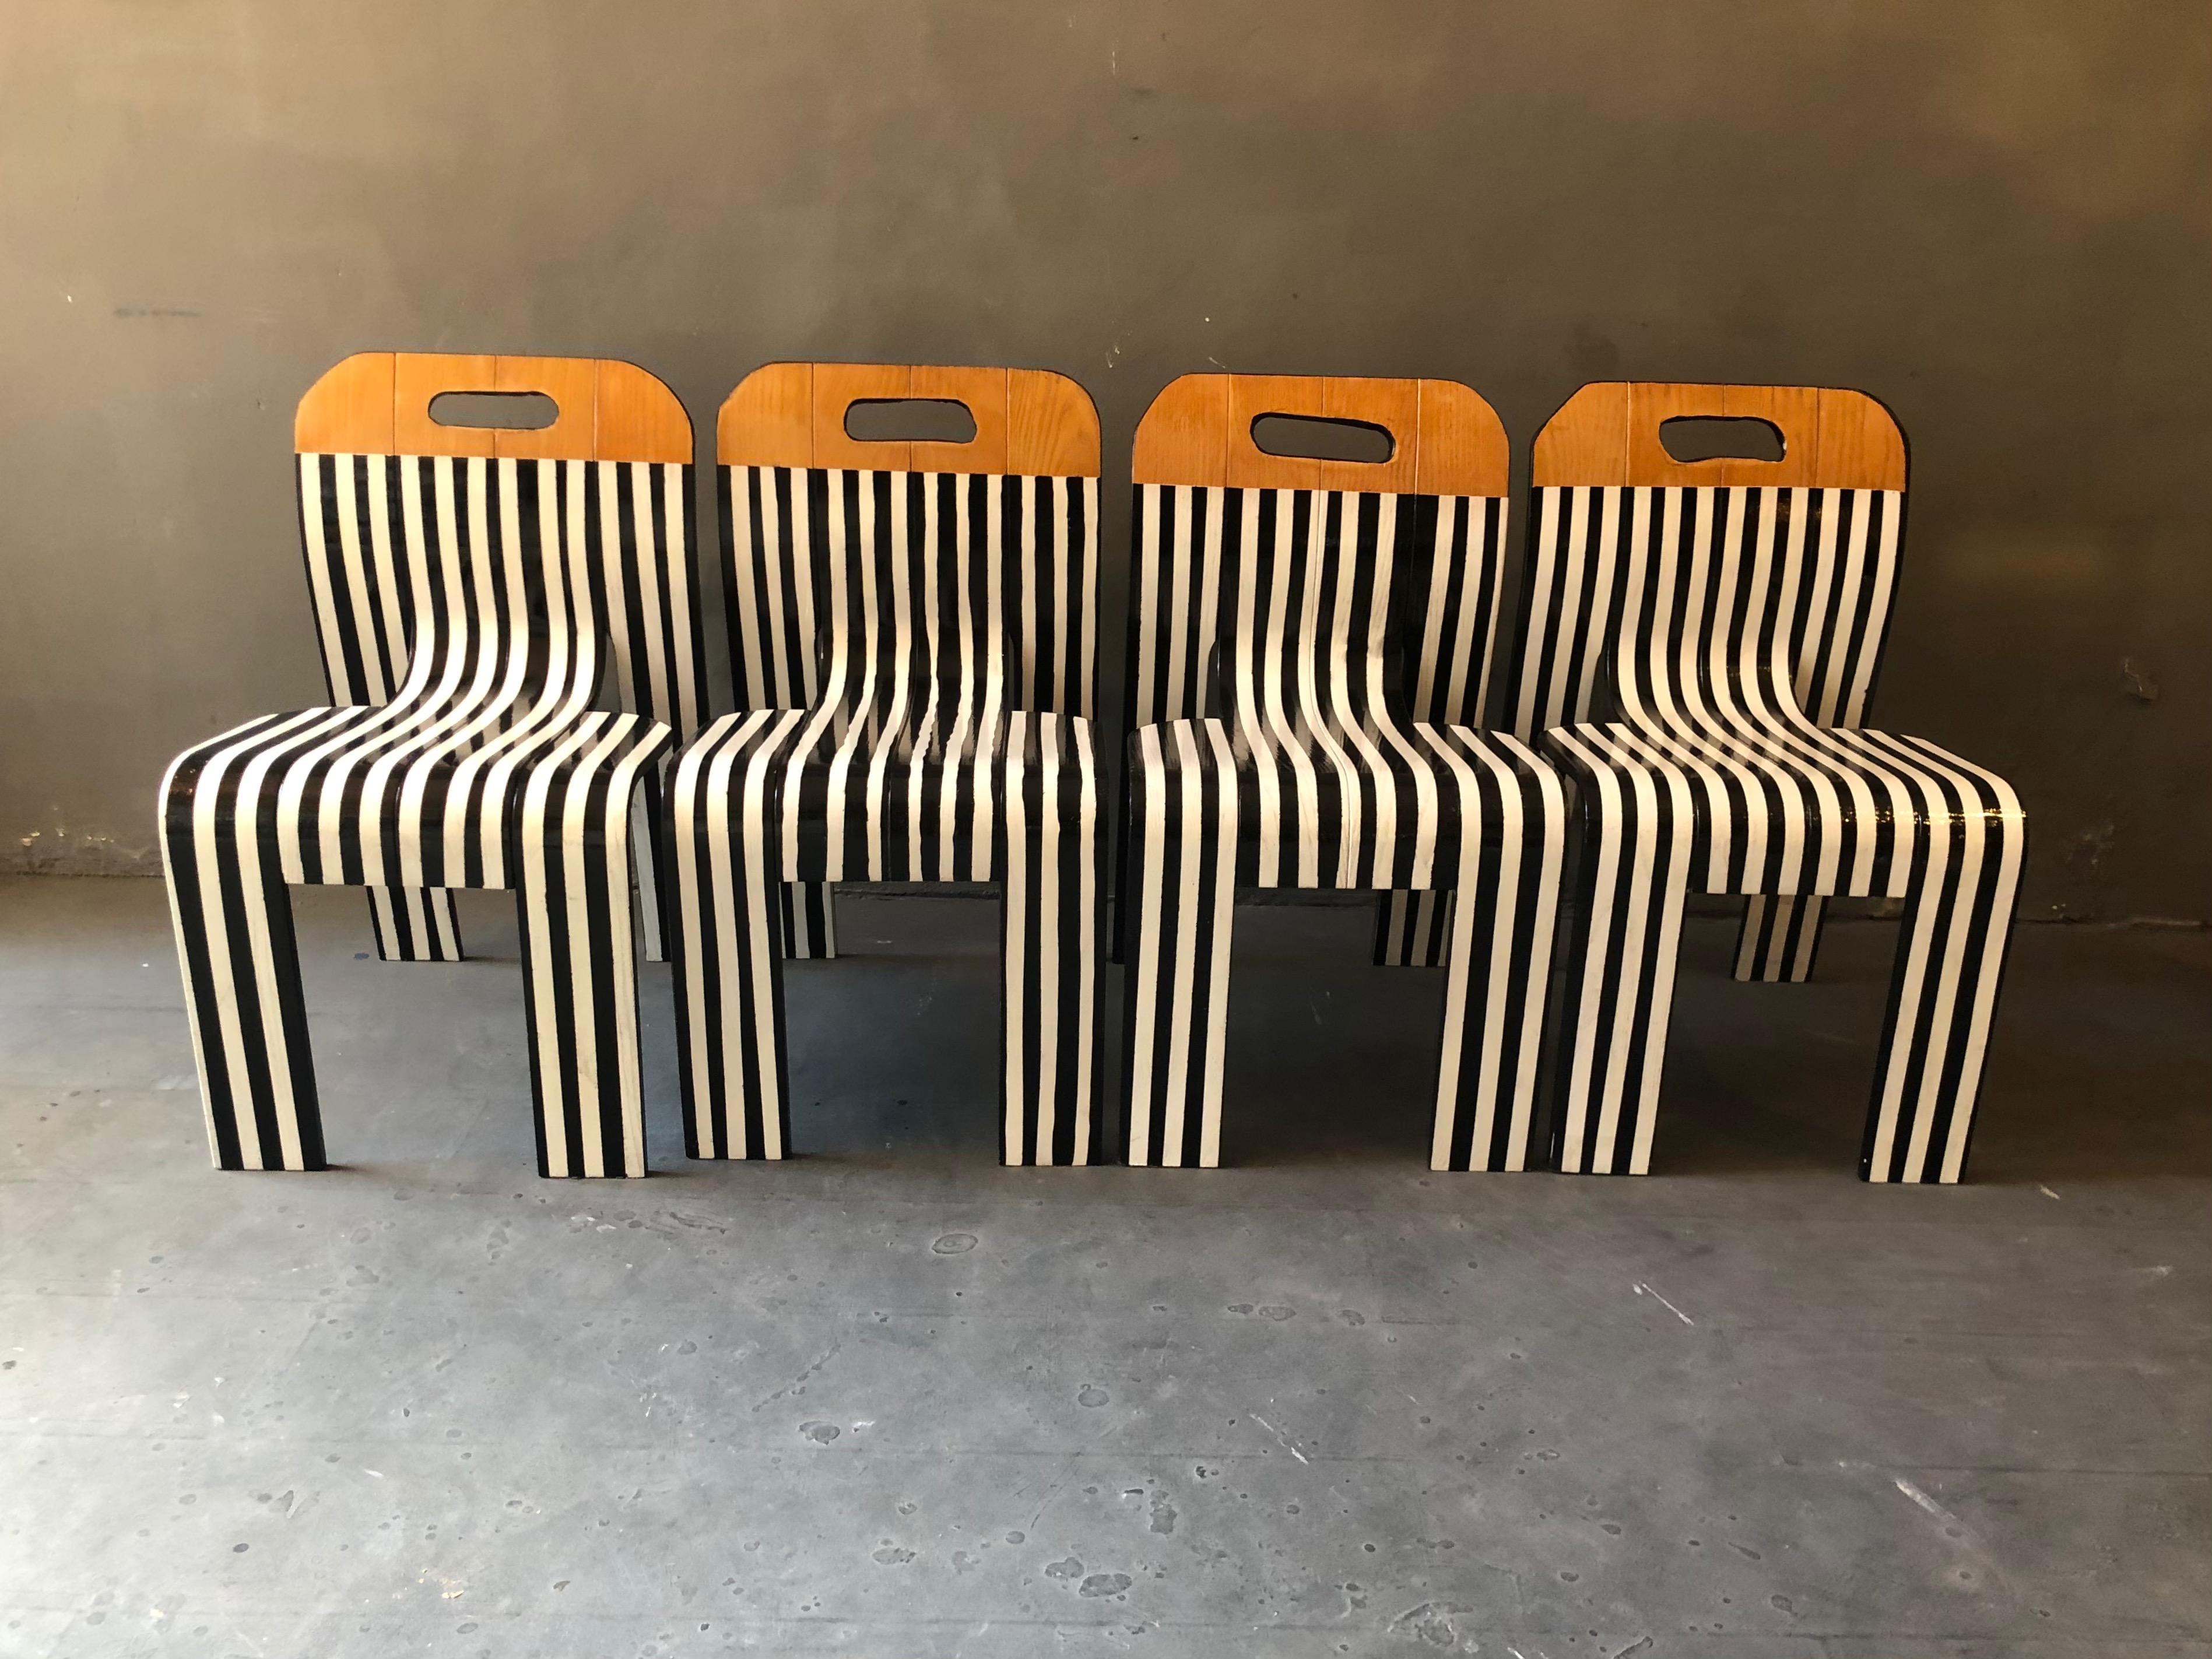 6 Strip Chairs by Gijs Bakker for Castelijn, contemporized by Markus Friedrich Staab, cut to change its original Industrial manufacture, griphole added, painted in black and white stripes, multi lacquered with high gloss lacquer.